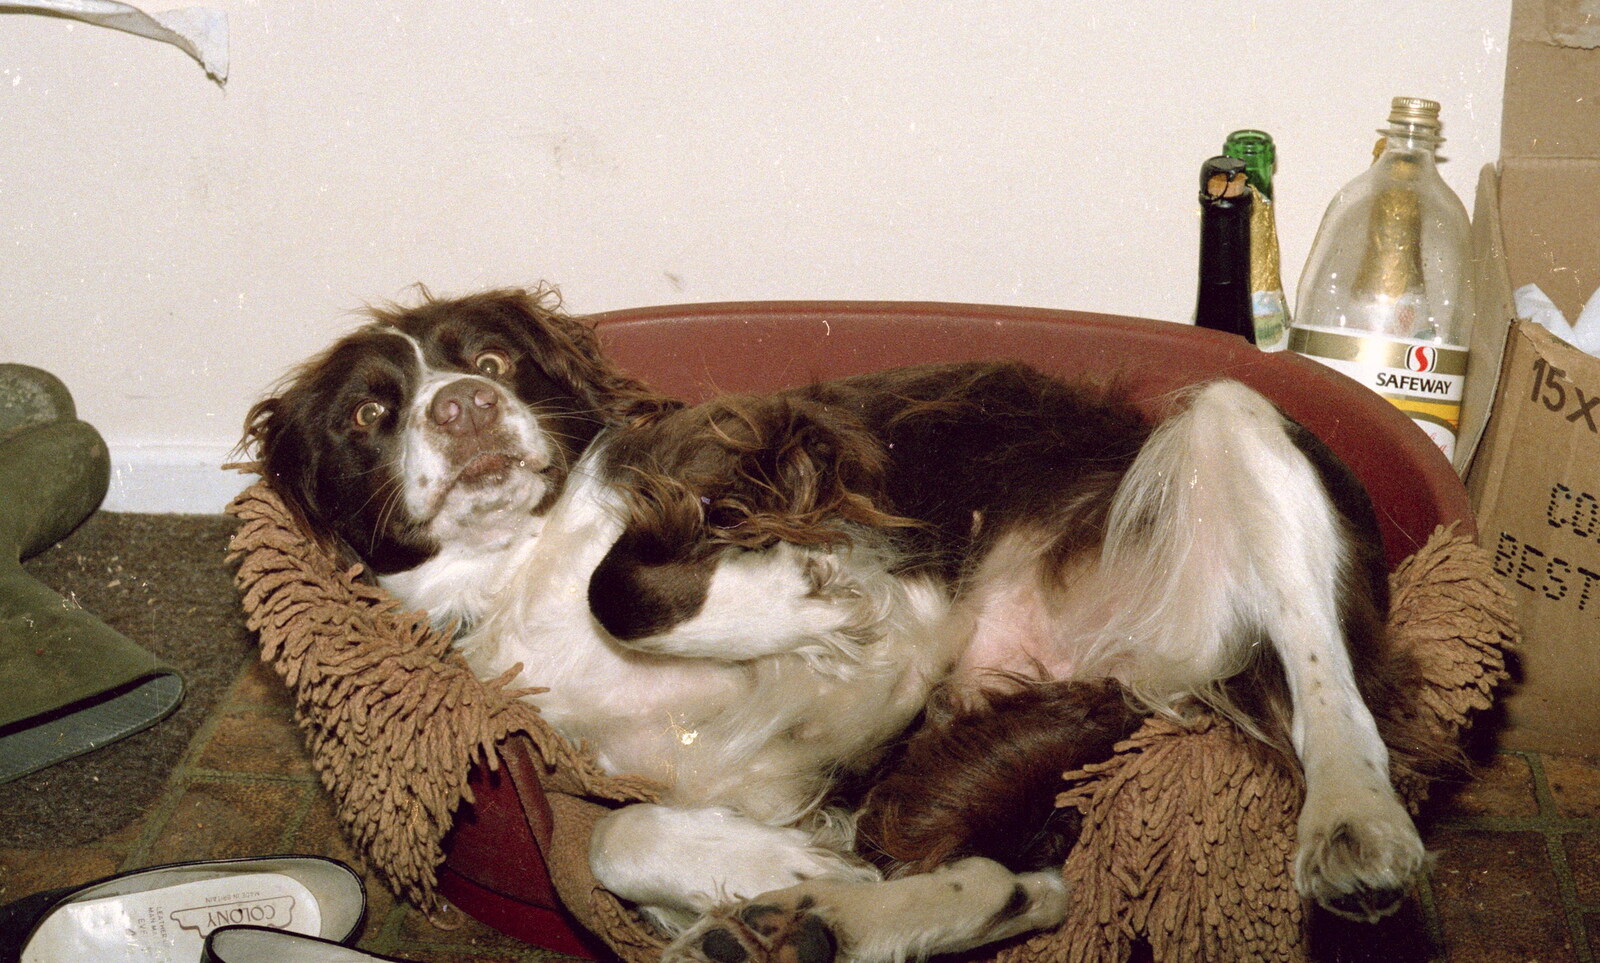 Sally, the crazy spaniel from New Year's Eve at Anna's, Walkford, Dorset - 31st December 1985